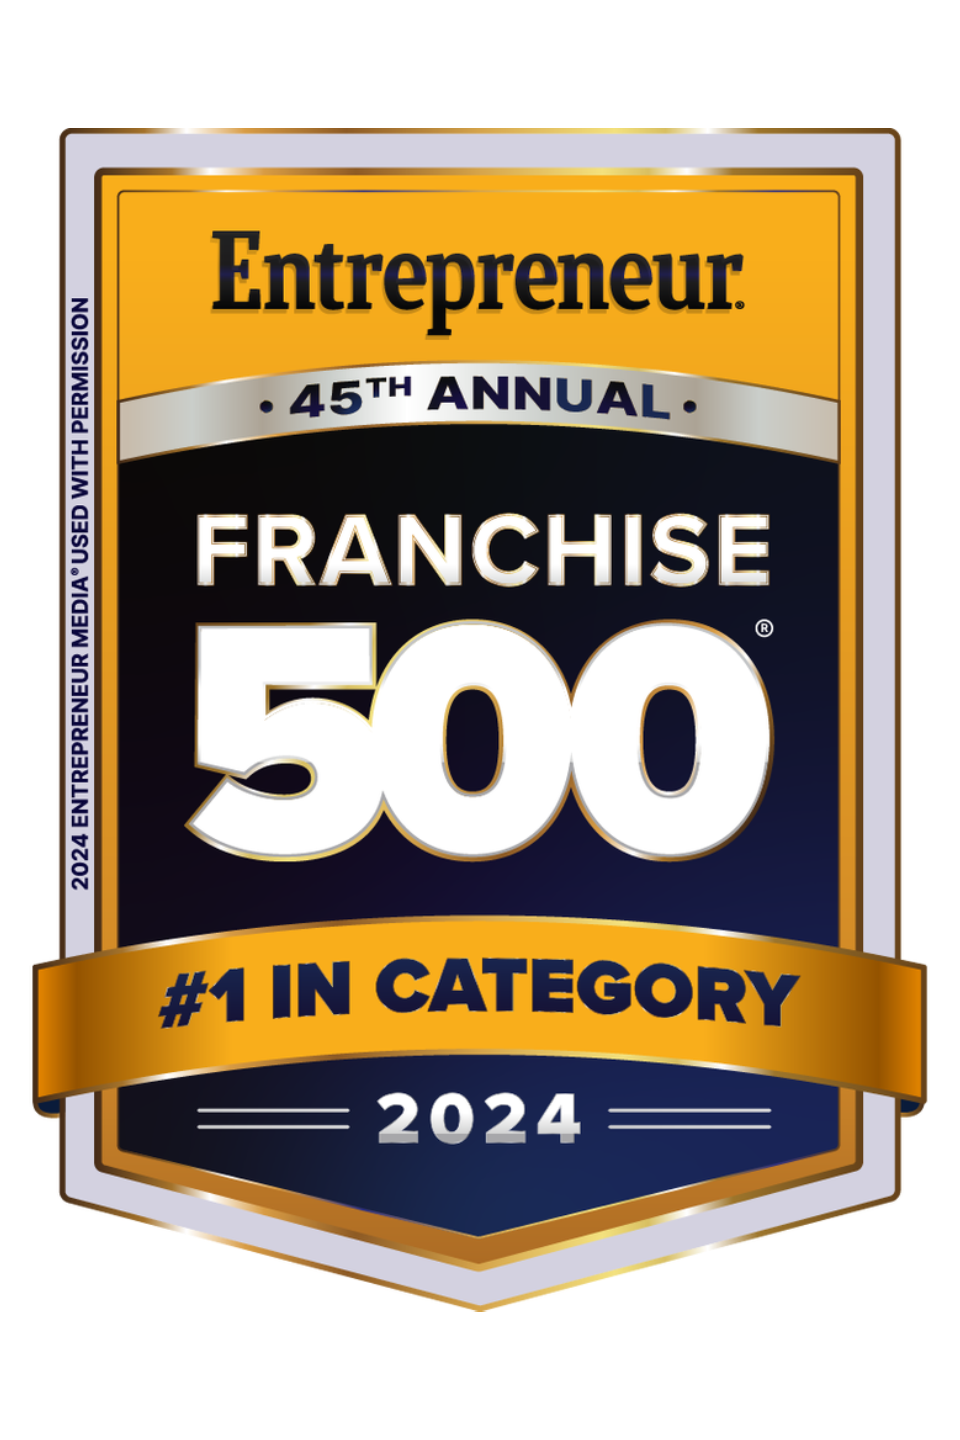 Entreprenuer Franchise 500 #1 in Category -2024